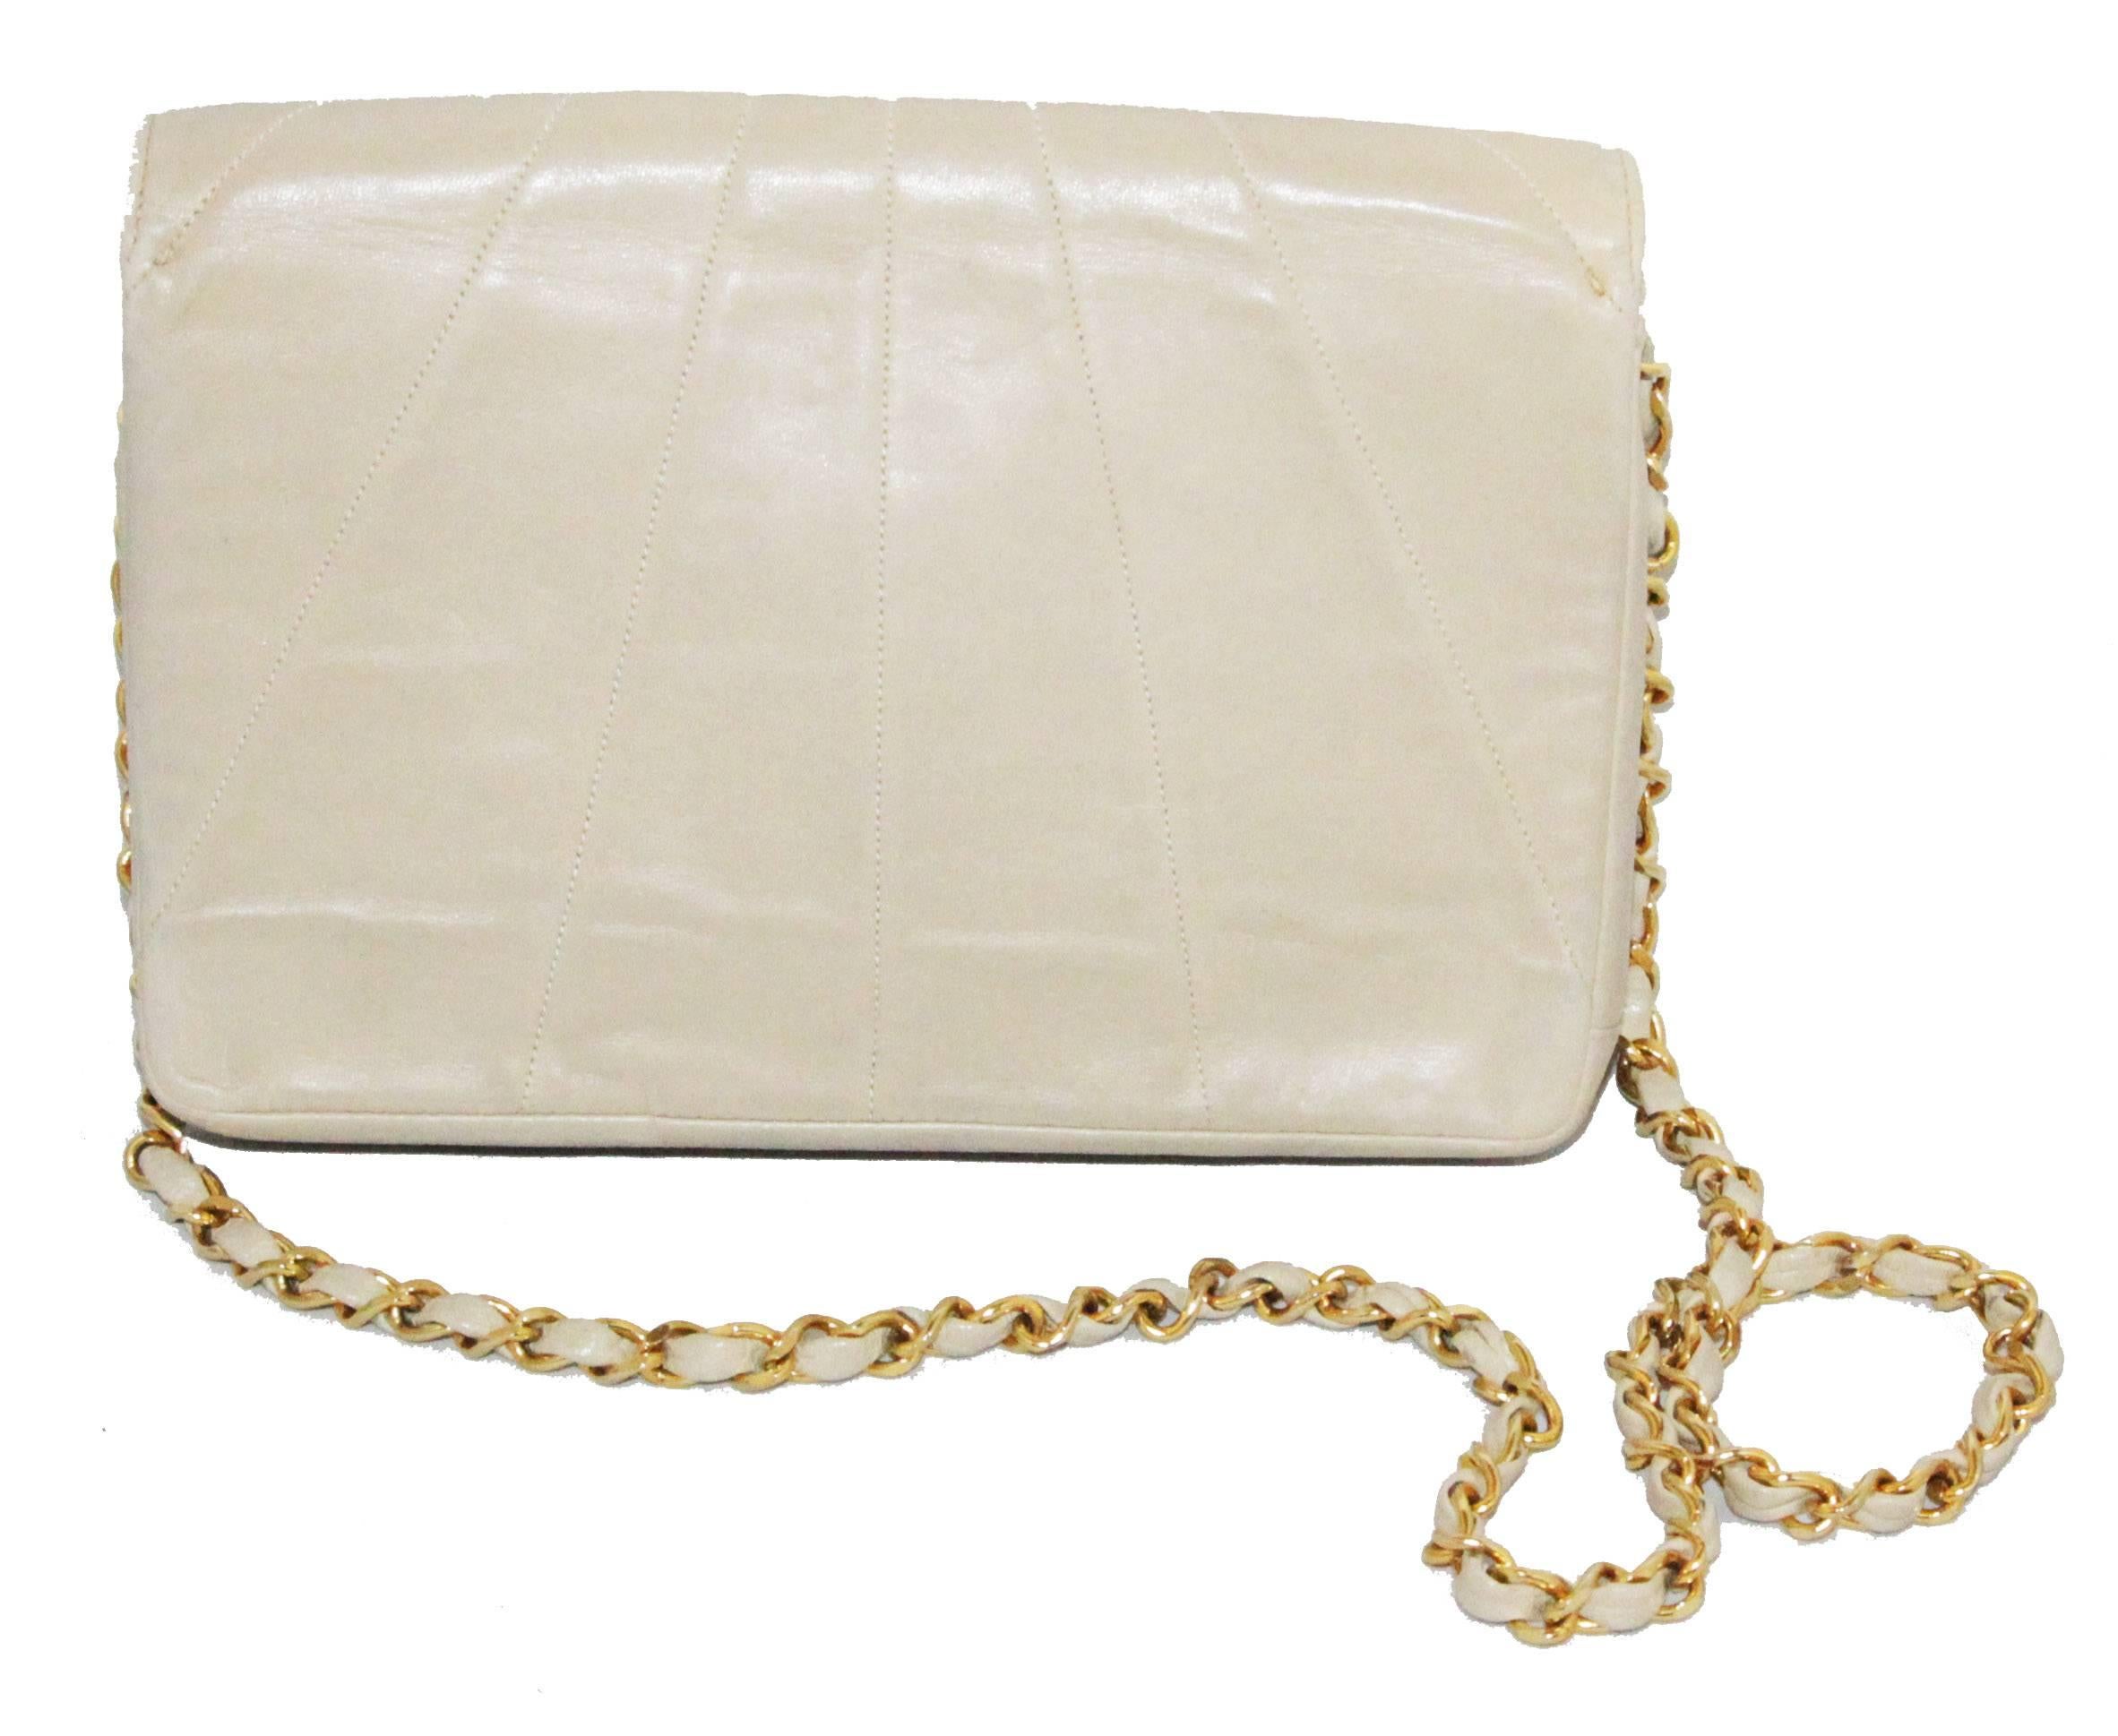 Chanel collector handbag of the 70s. Extremely rare to find. Quiletd calf leather, lion gilt bronze. Marked: Chanel Made in France. Size: 21 x 15 x 5 cm - 8 1/4 x 5.9 x 2 in. Excellent vintage condition. 